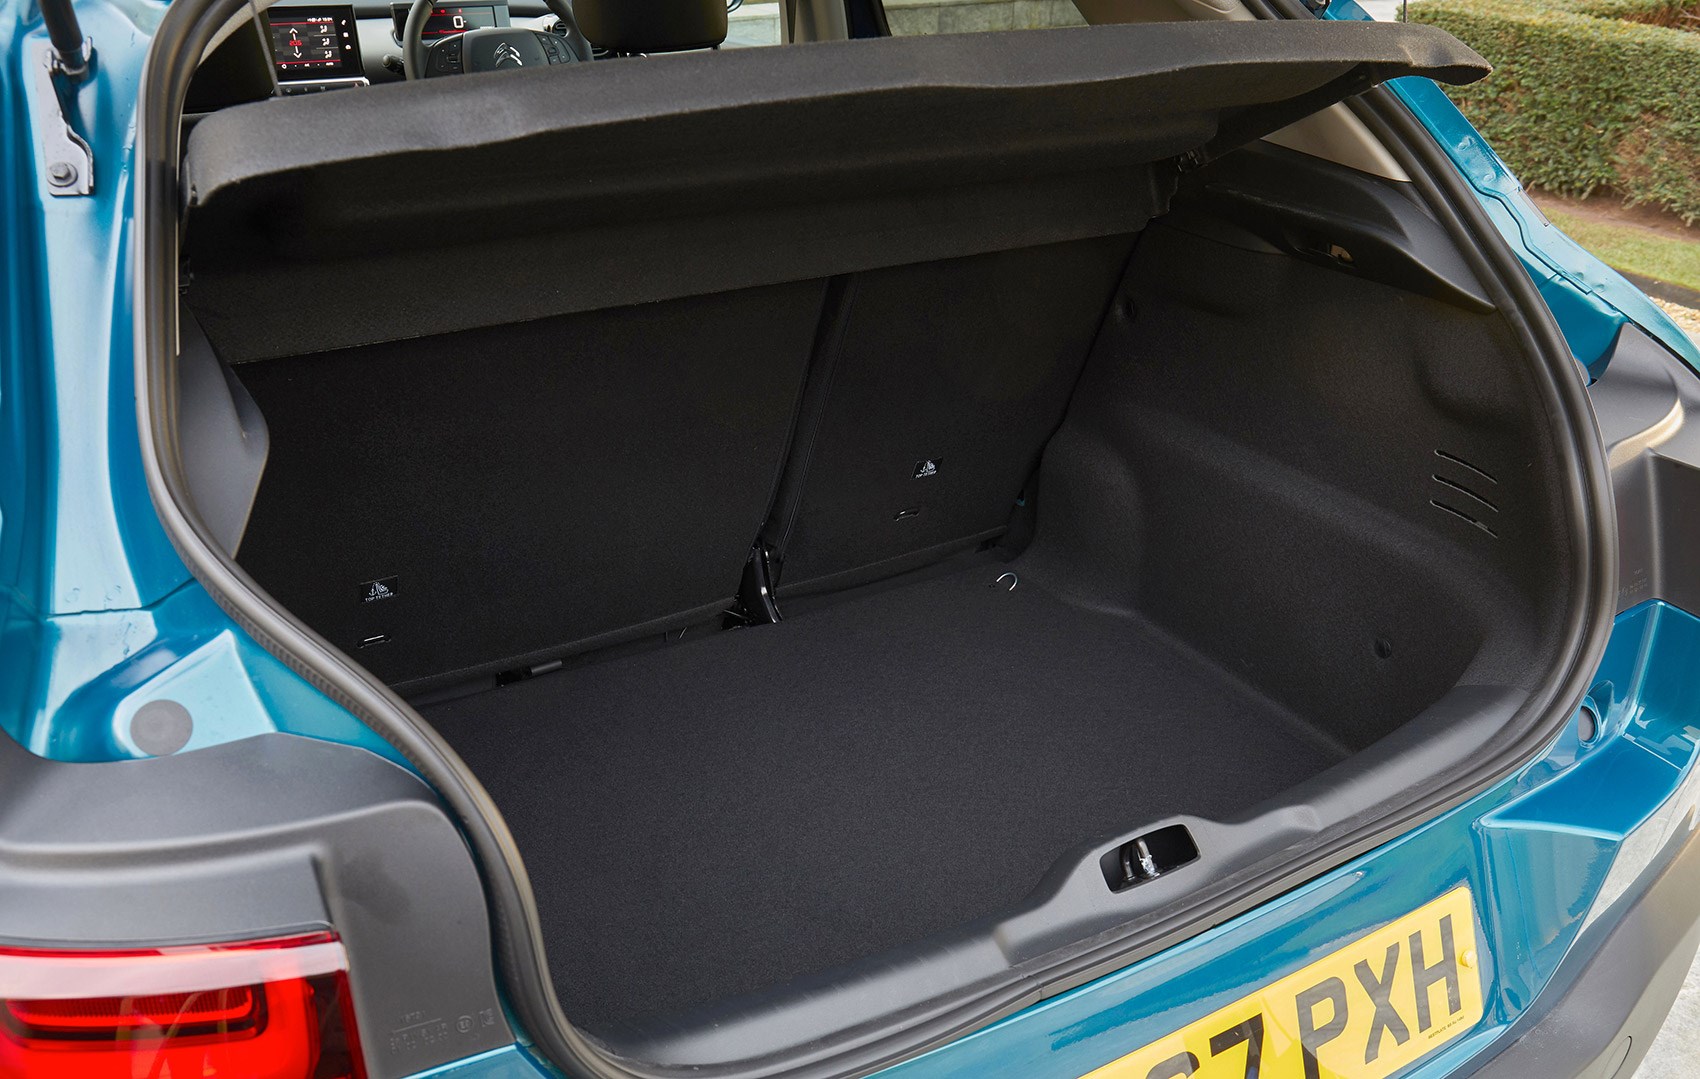 Citroen C4 Cactus boot and interior space and dimensions